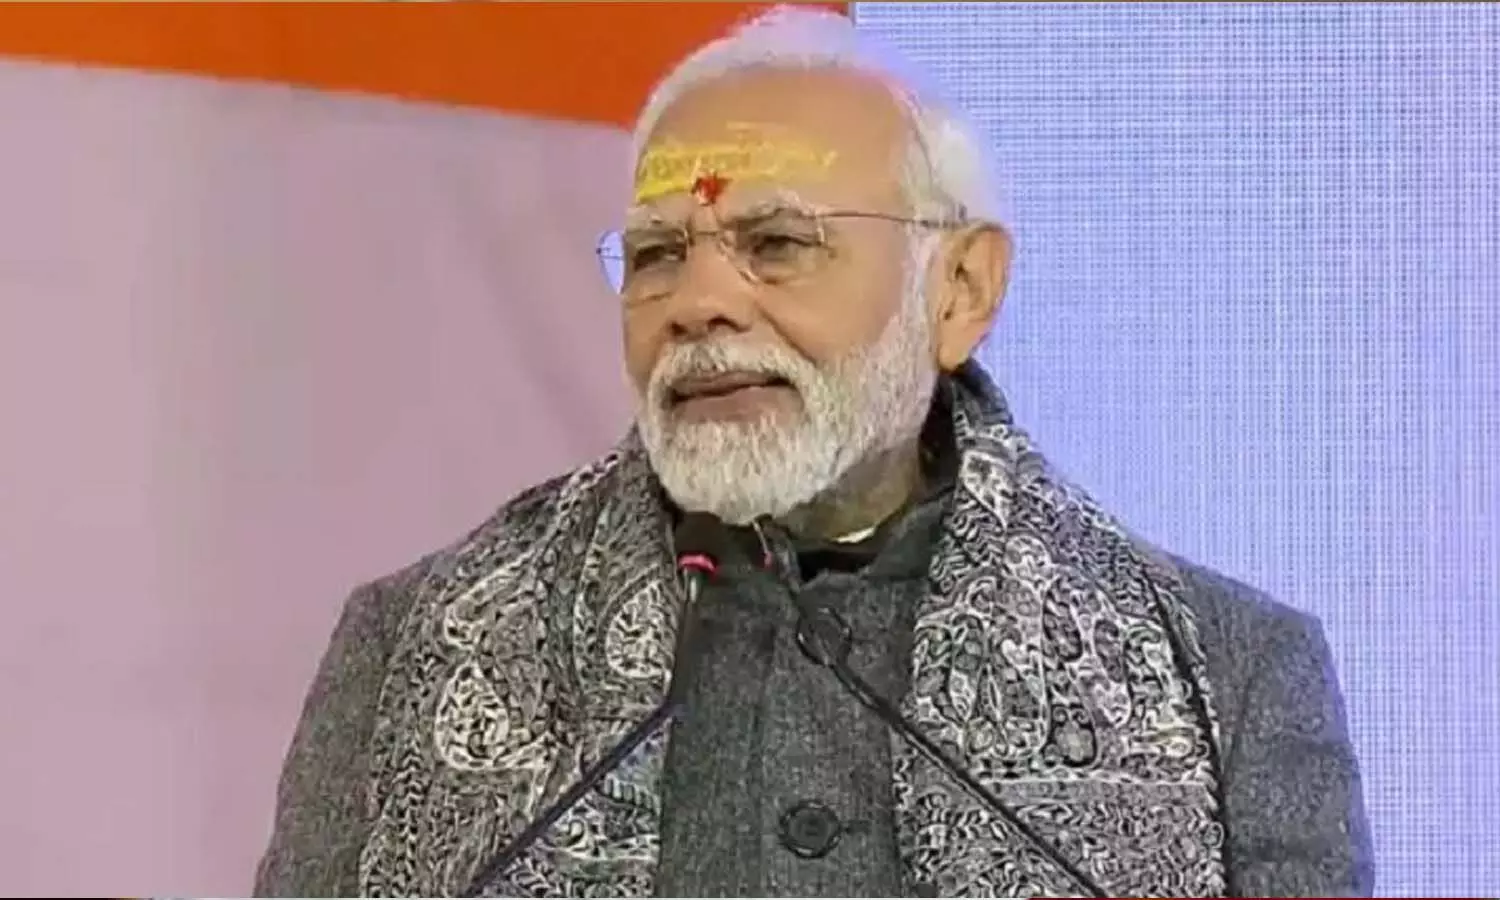 PM Modi spoke at the job fair, said- youth of Uttarakhand returned to villages, new employment opportunities are being created